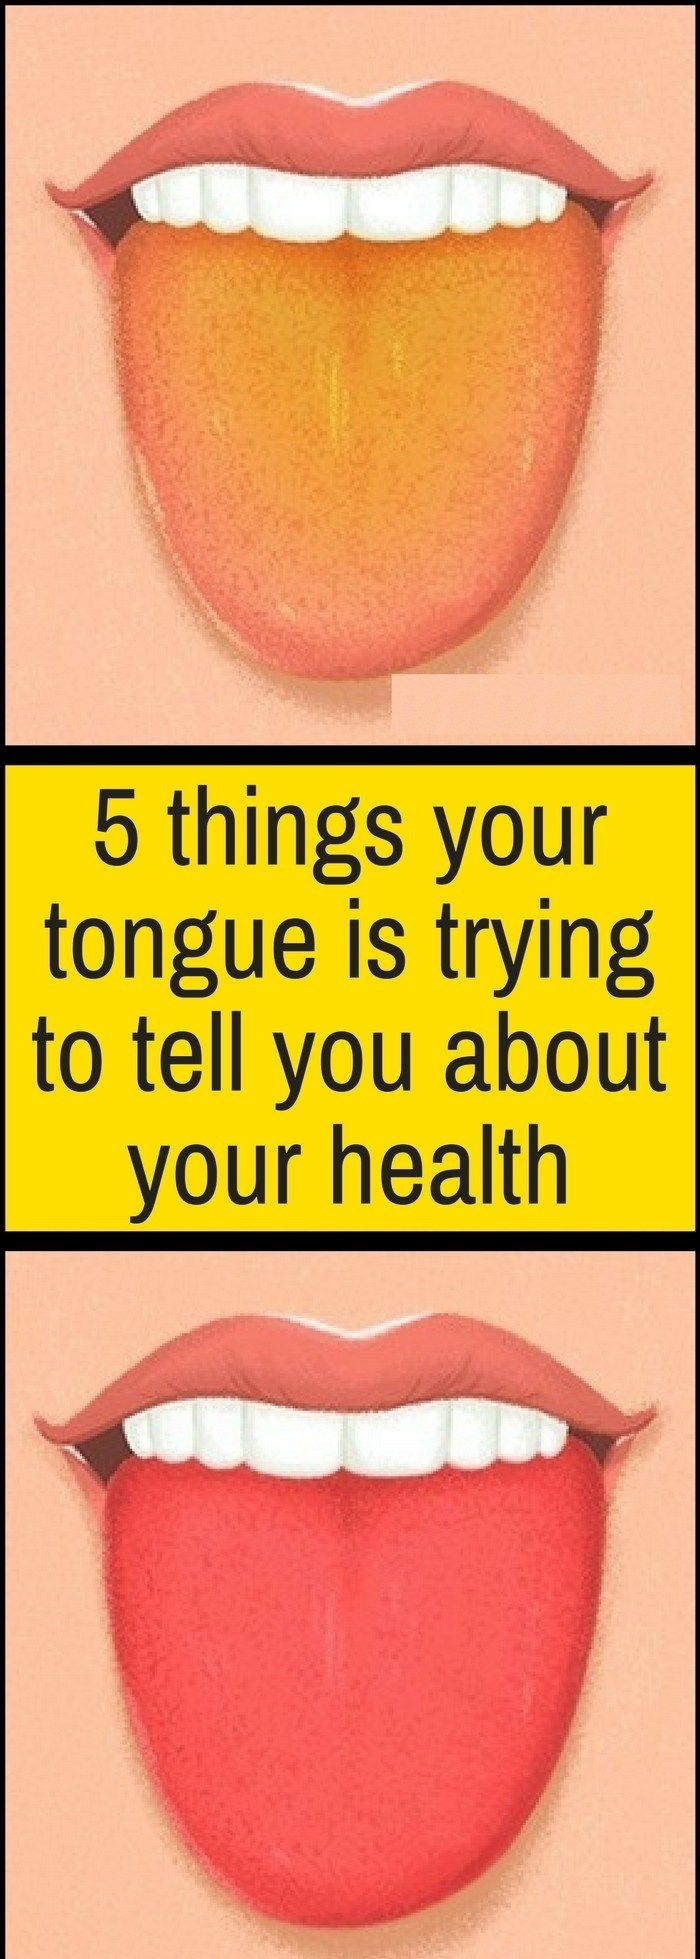 5-Things-Your-Tongue-Is-Trying-To-Tell-You-About-Your-Health-1.jpg